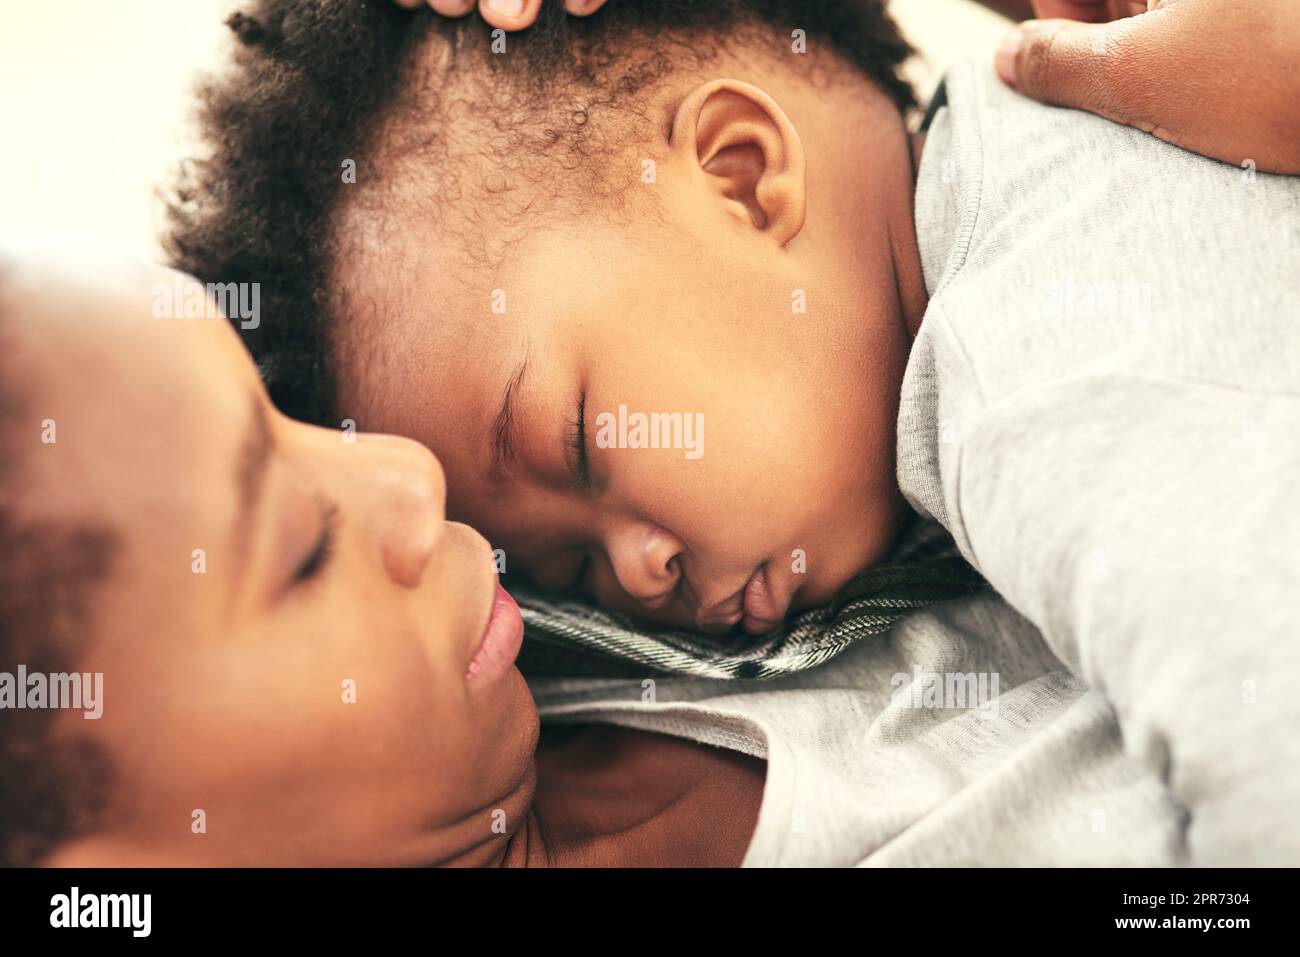 Hes growing up fast. Shot of a mother cradling her little baby boy. Stock Photo